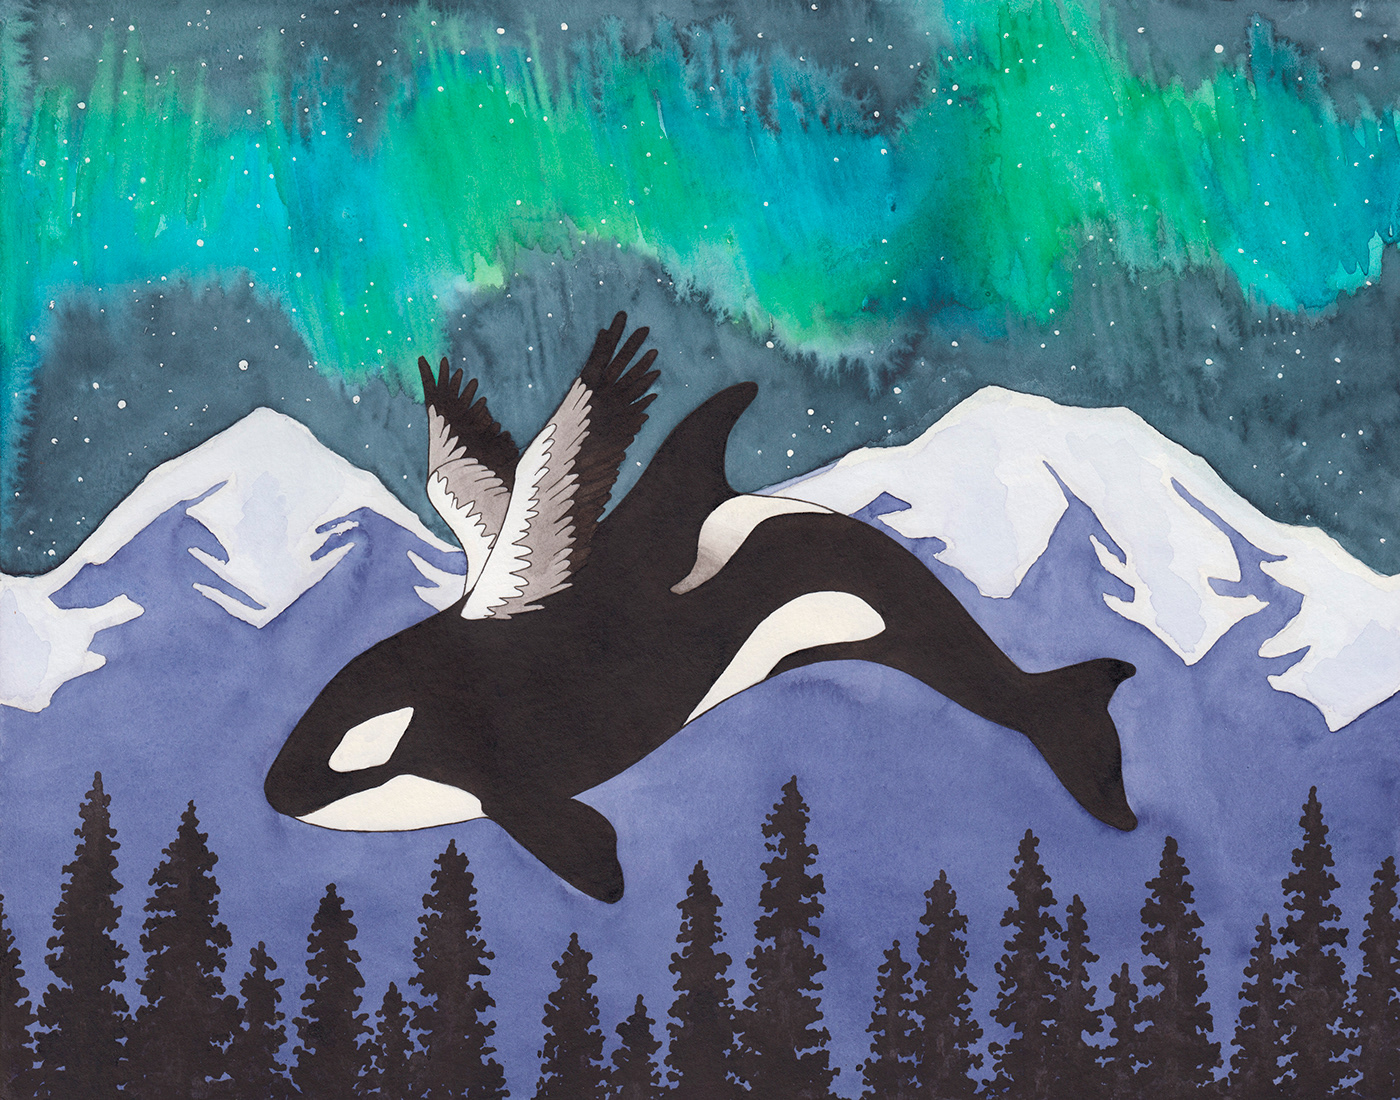 orca killer whale artic forest mountains wings fantasy